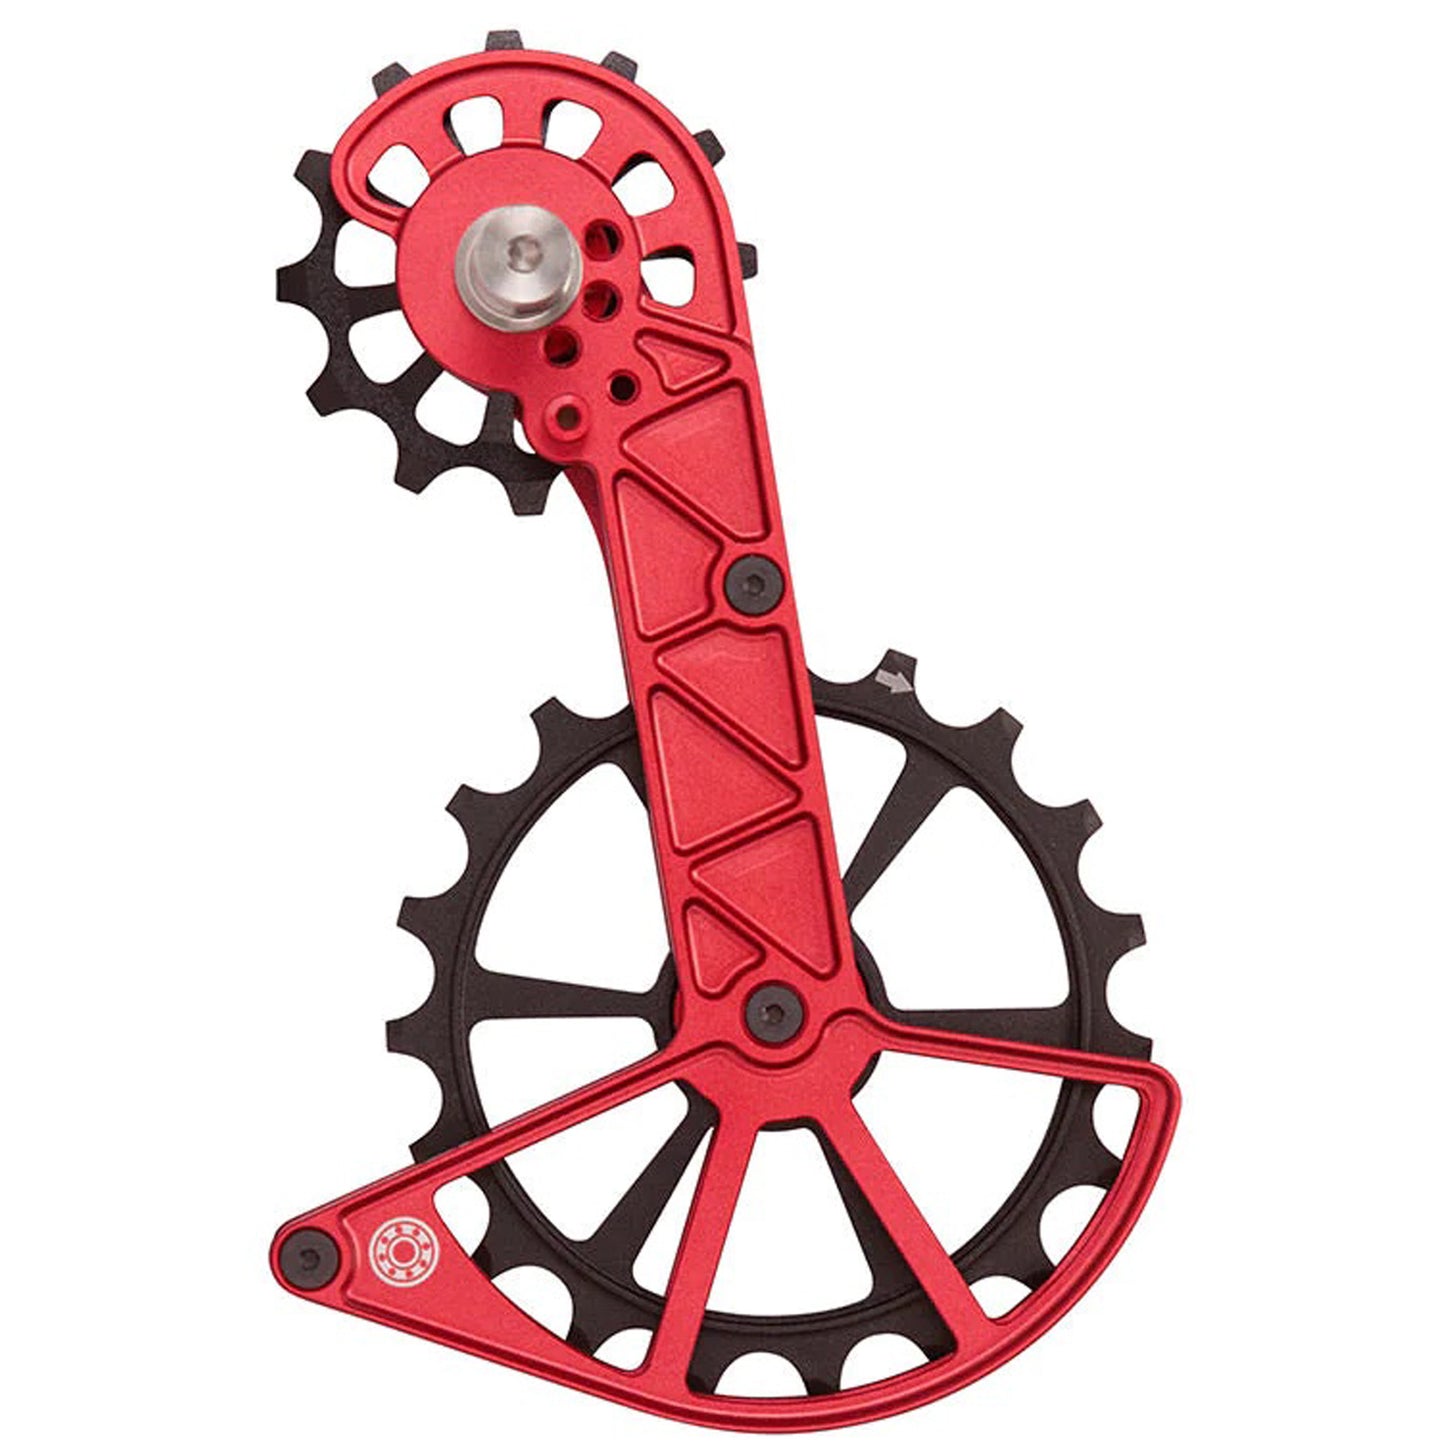 Kolossos Oversized Pulley Cage, Shim R9200 - Red